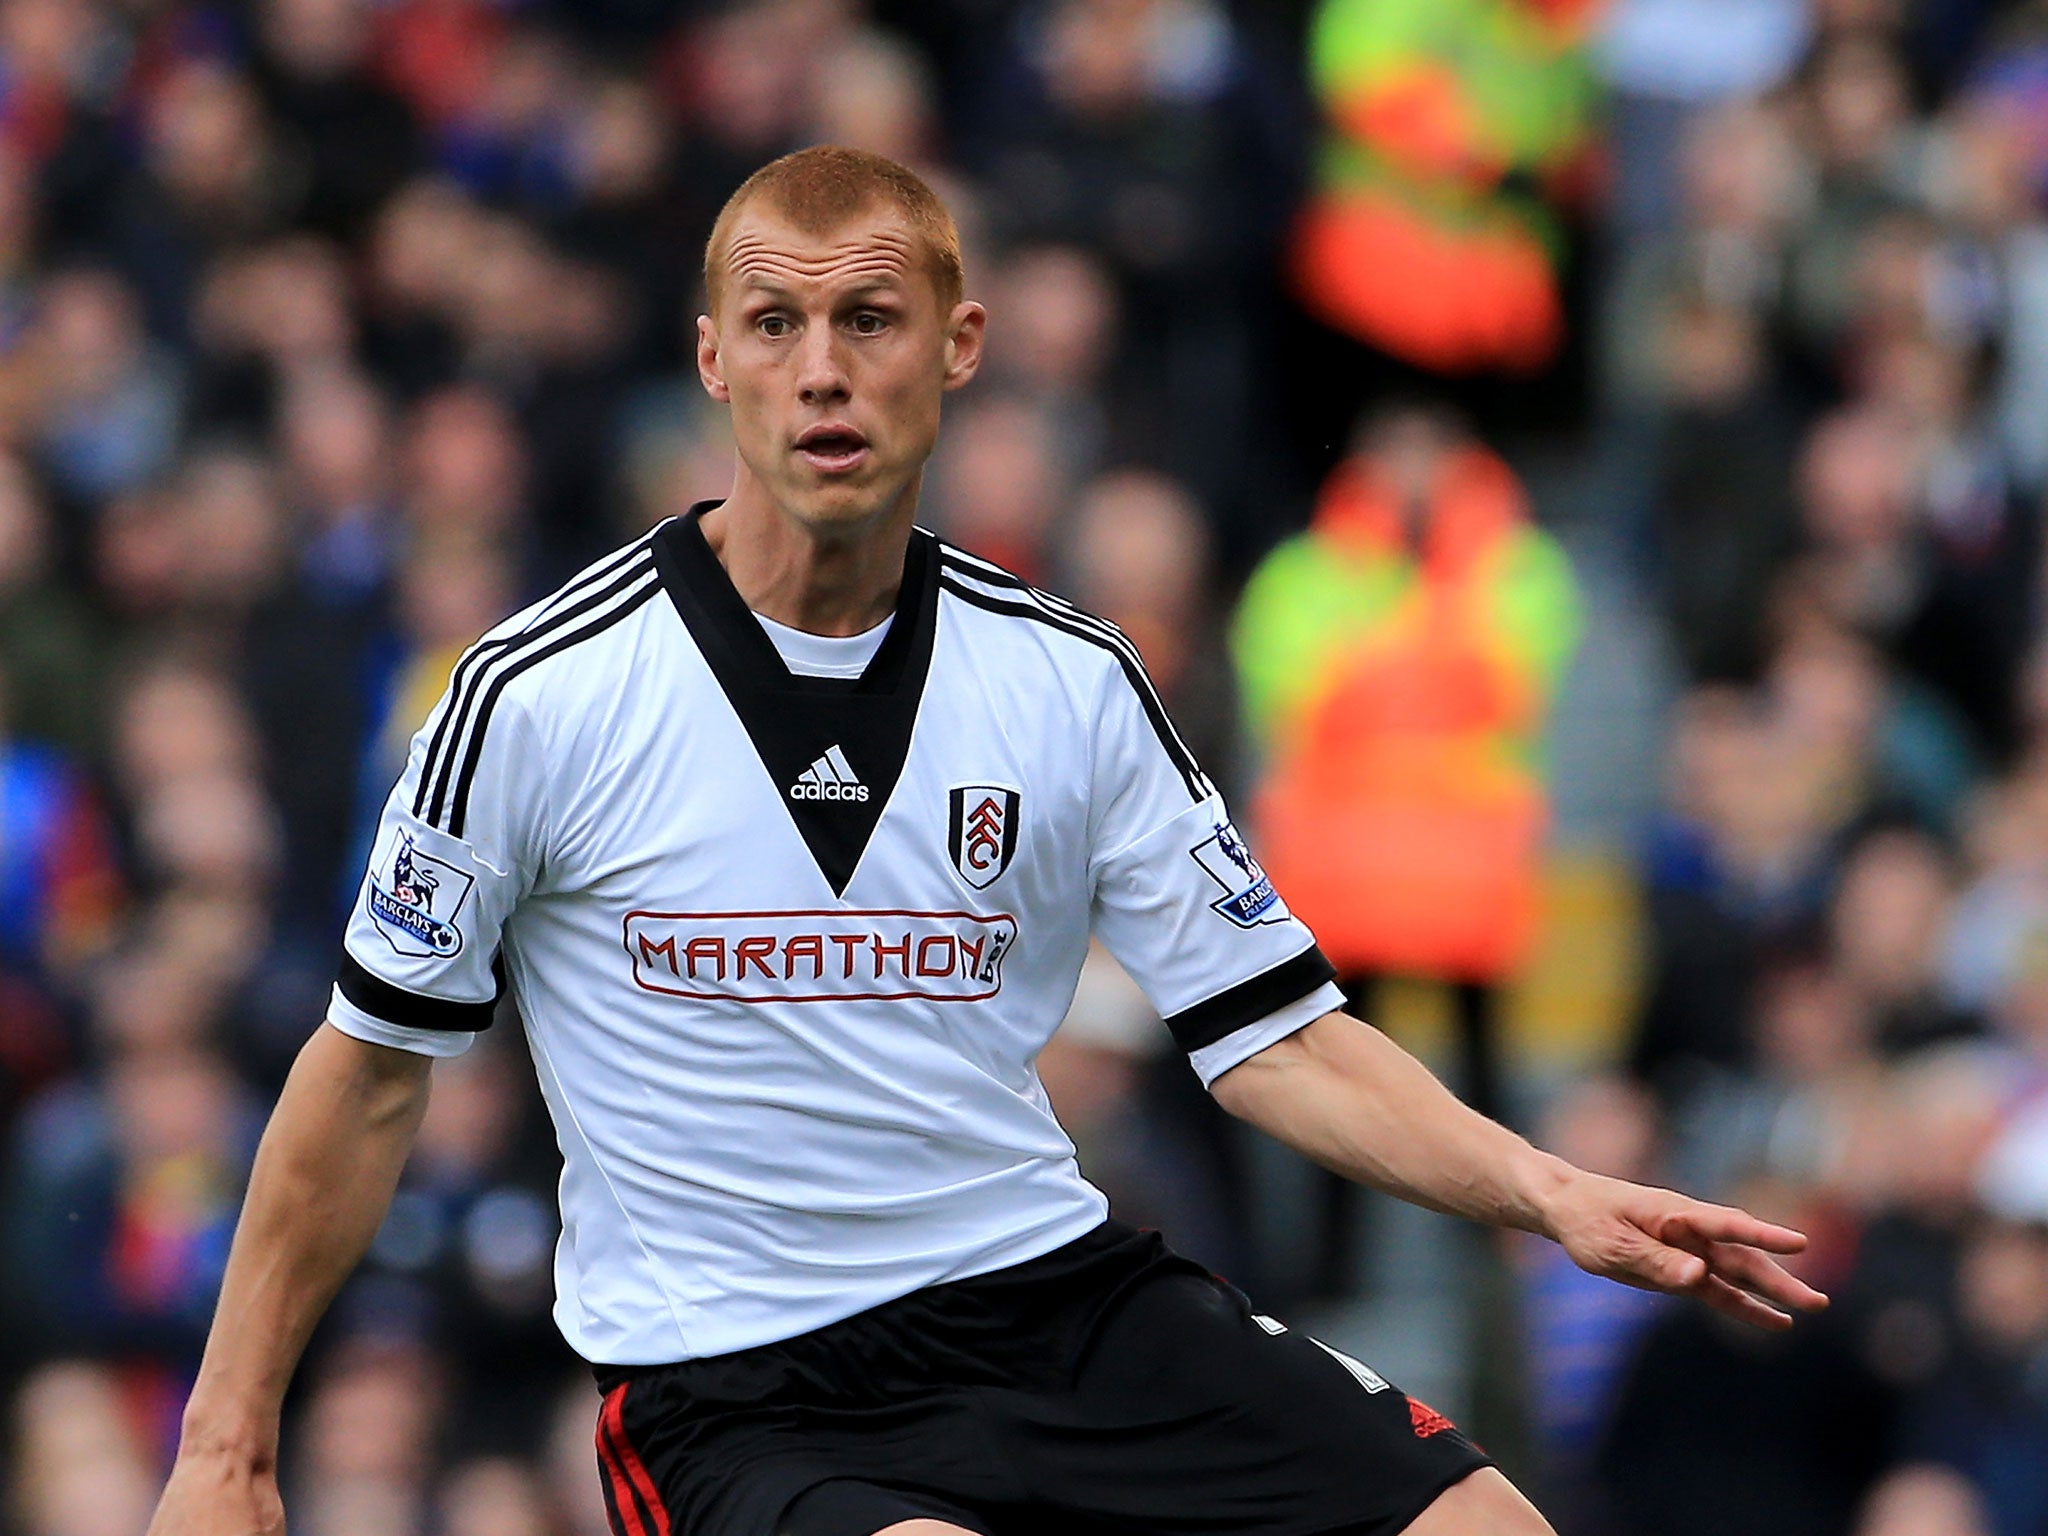 Steve Sidwell has joined Stoke on a free transfer after being released by relegated Fulham